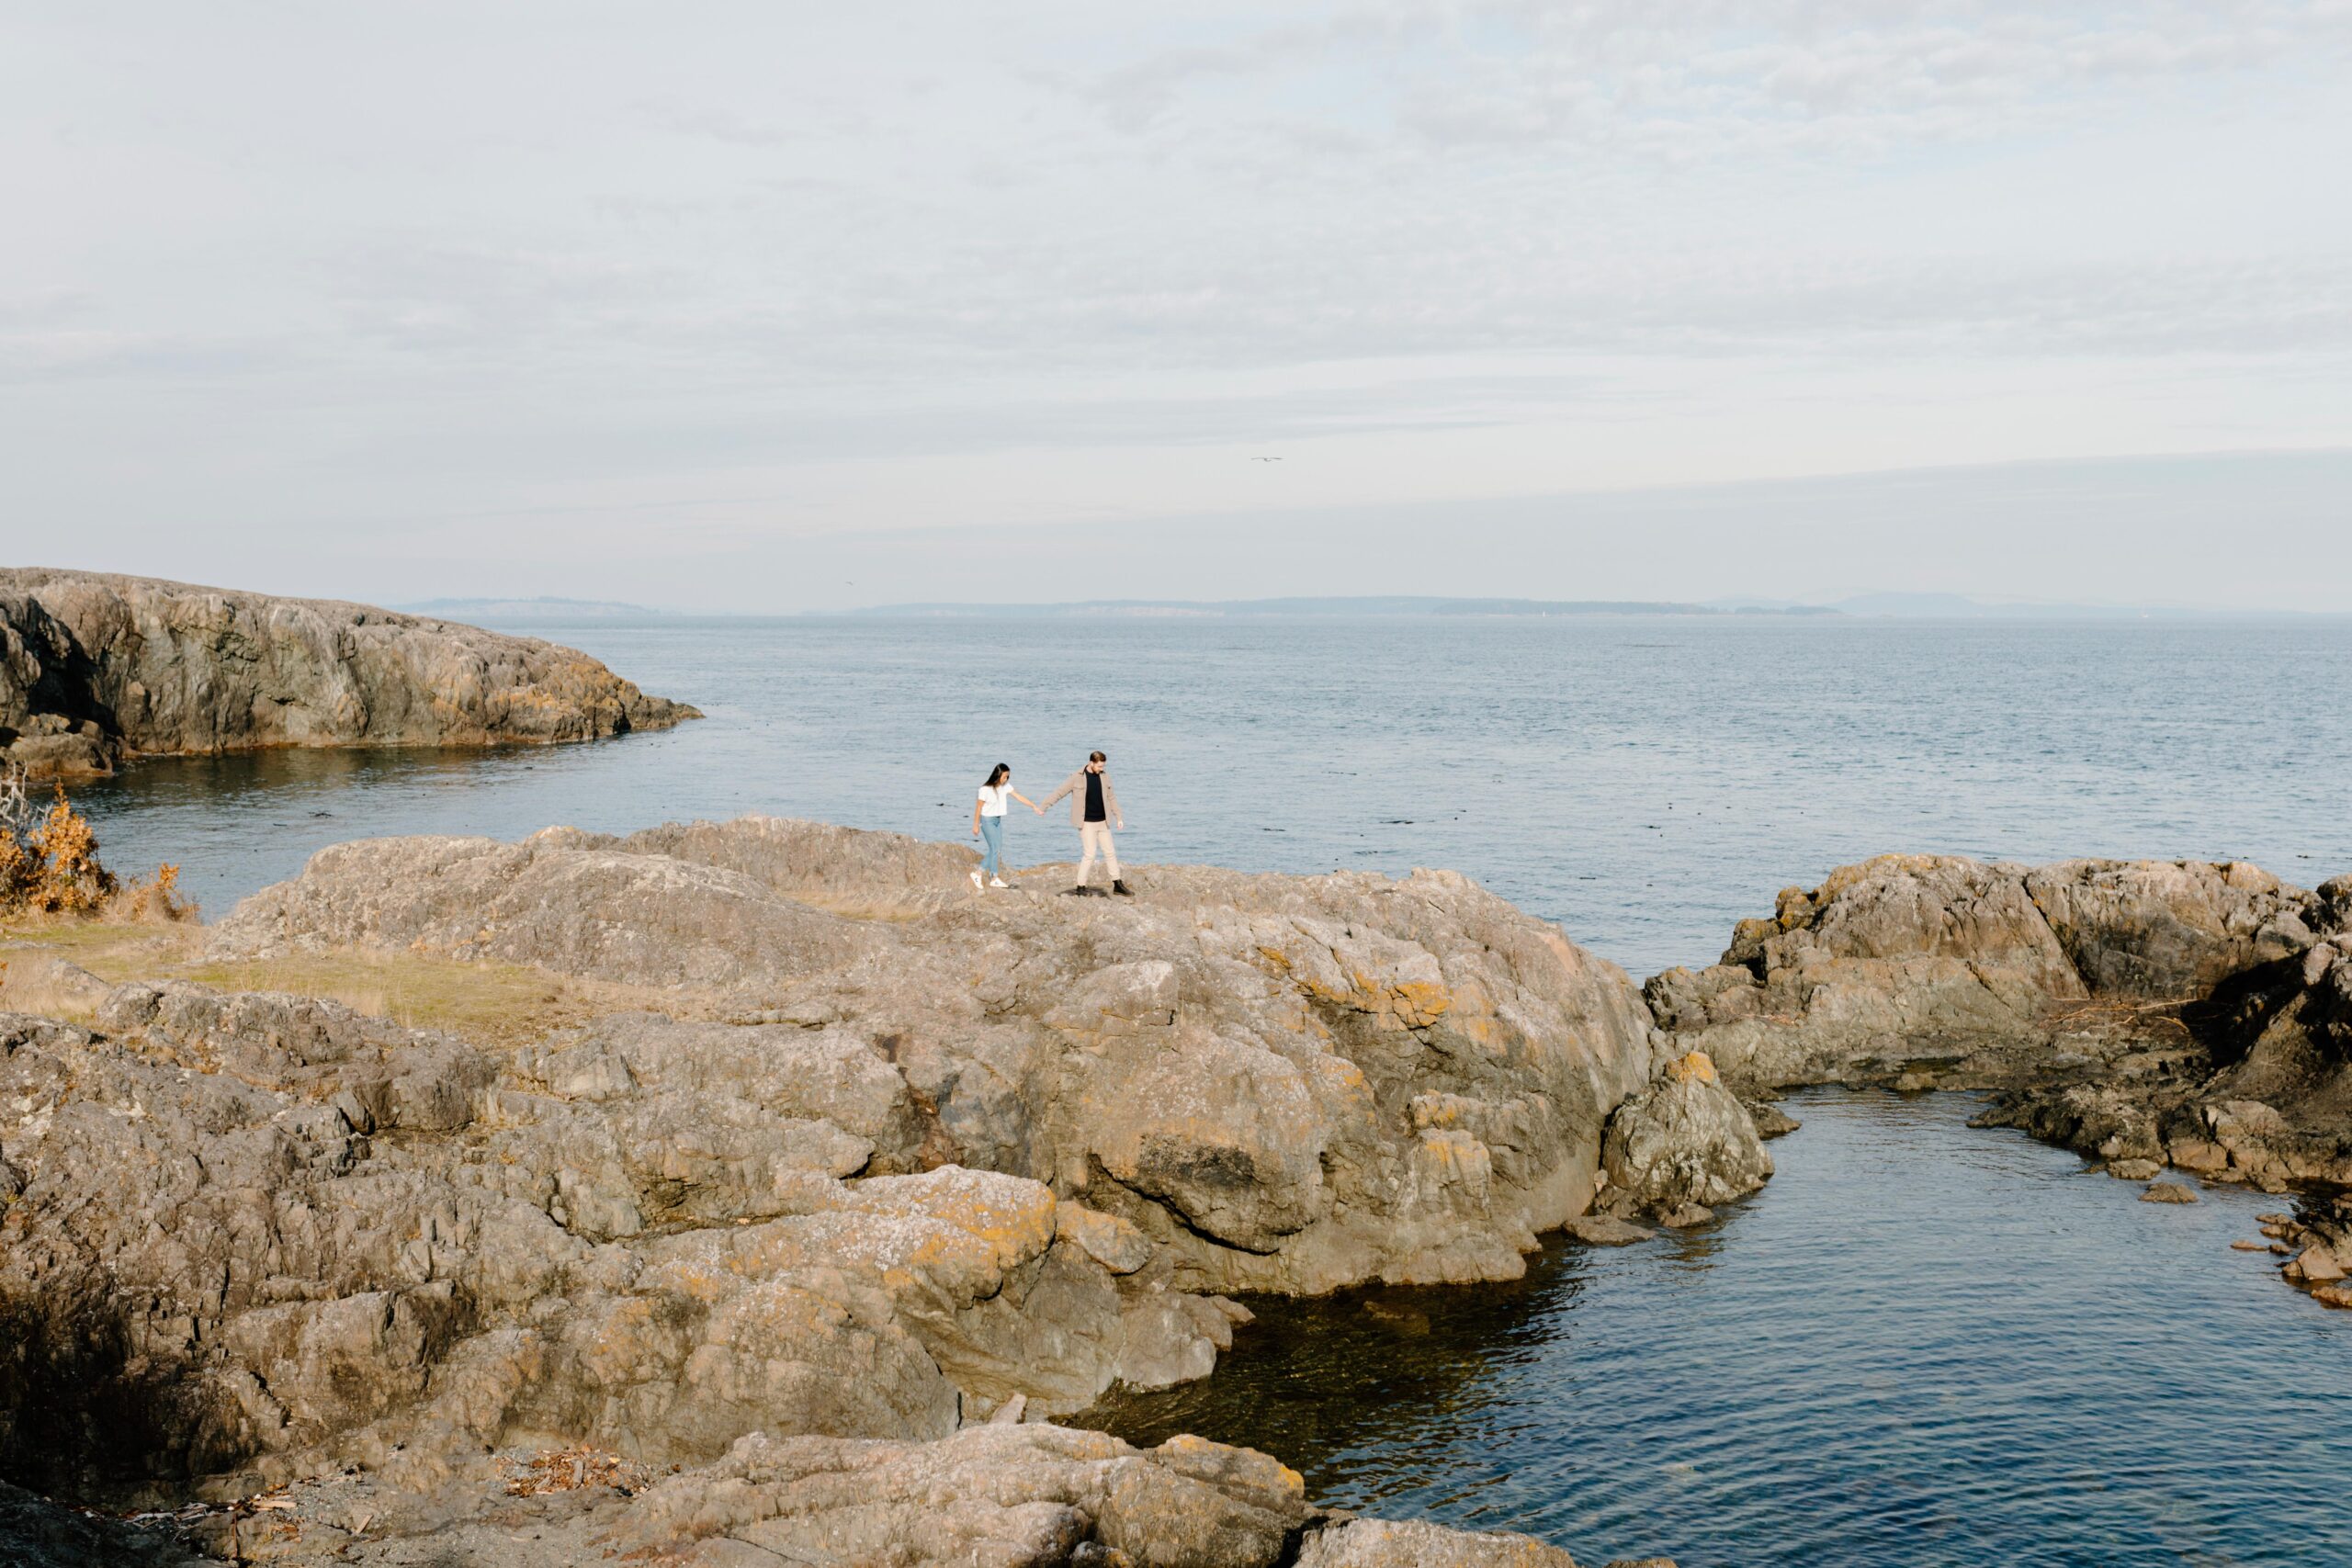 A man and woman are holding hands and standing on rocks overlooking an endless body of water